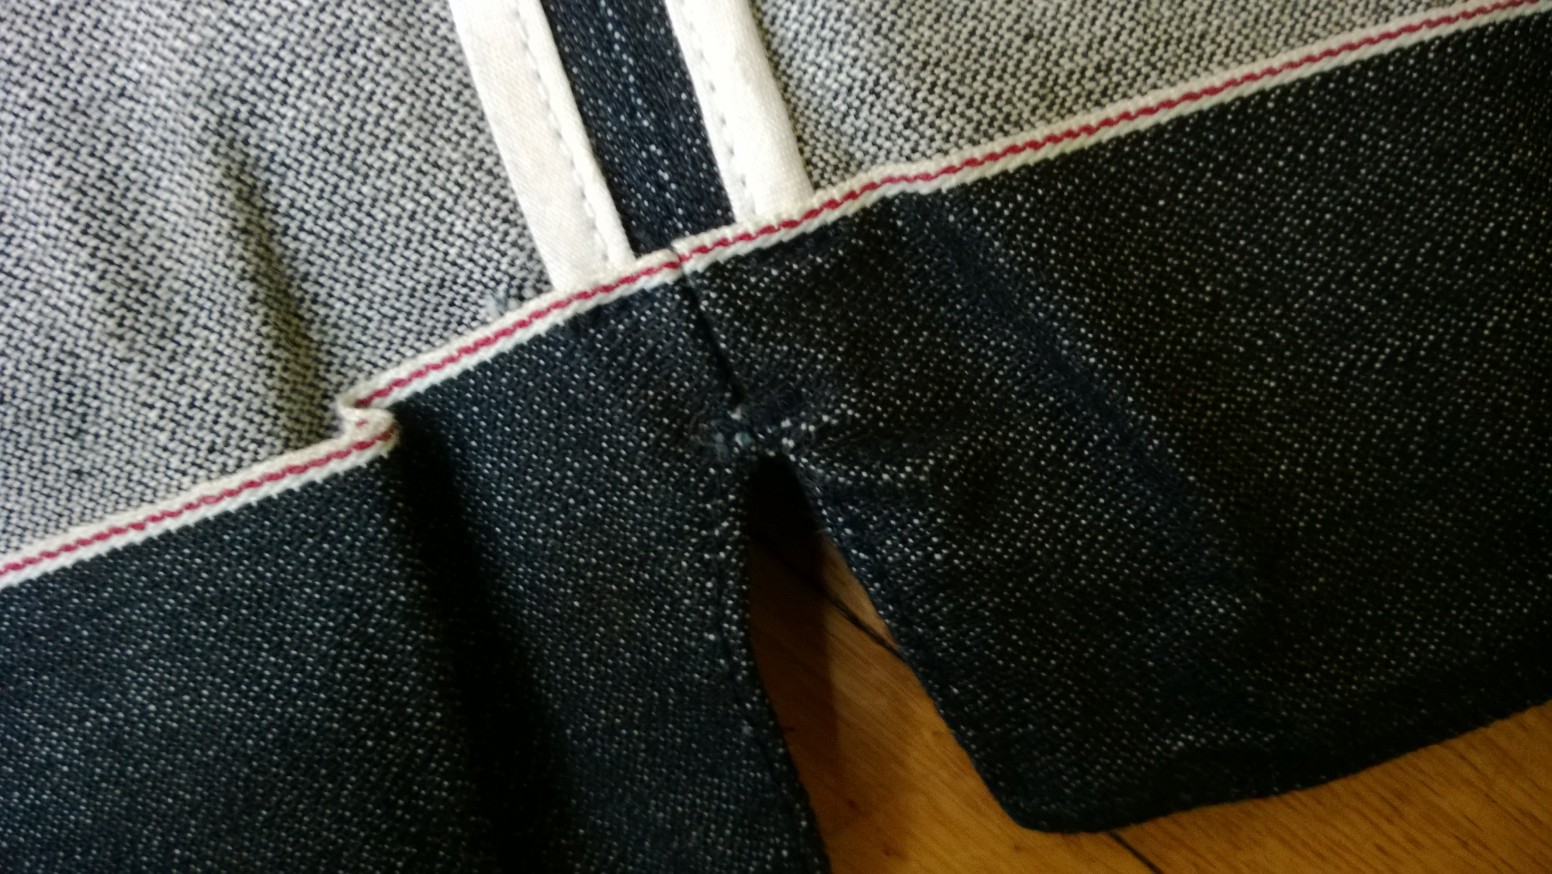 japanese jean traditions with american heritage of denim. - Tailored ...